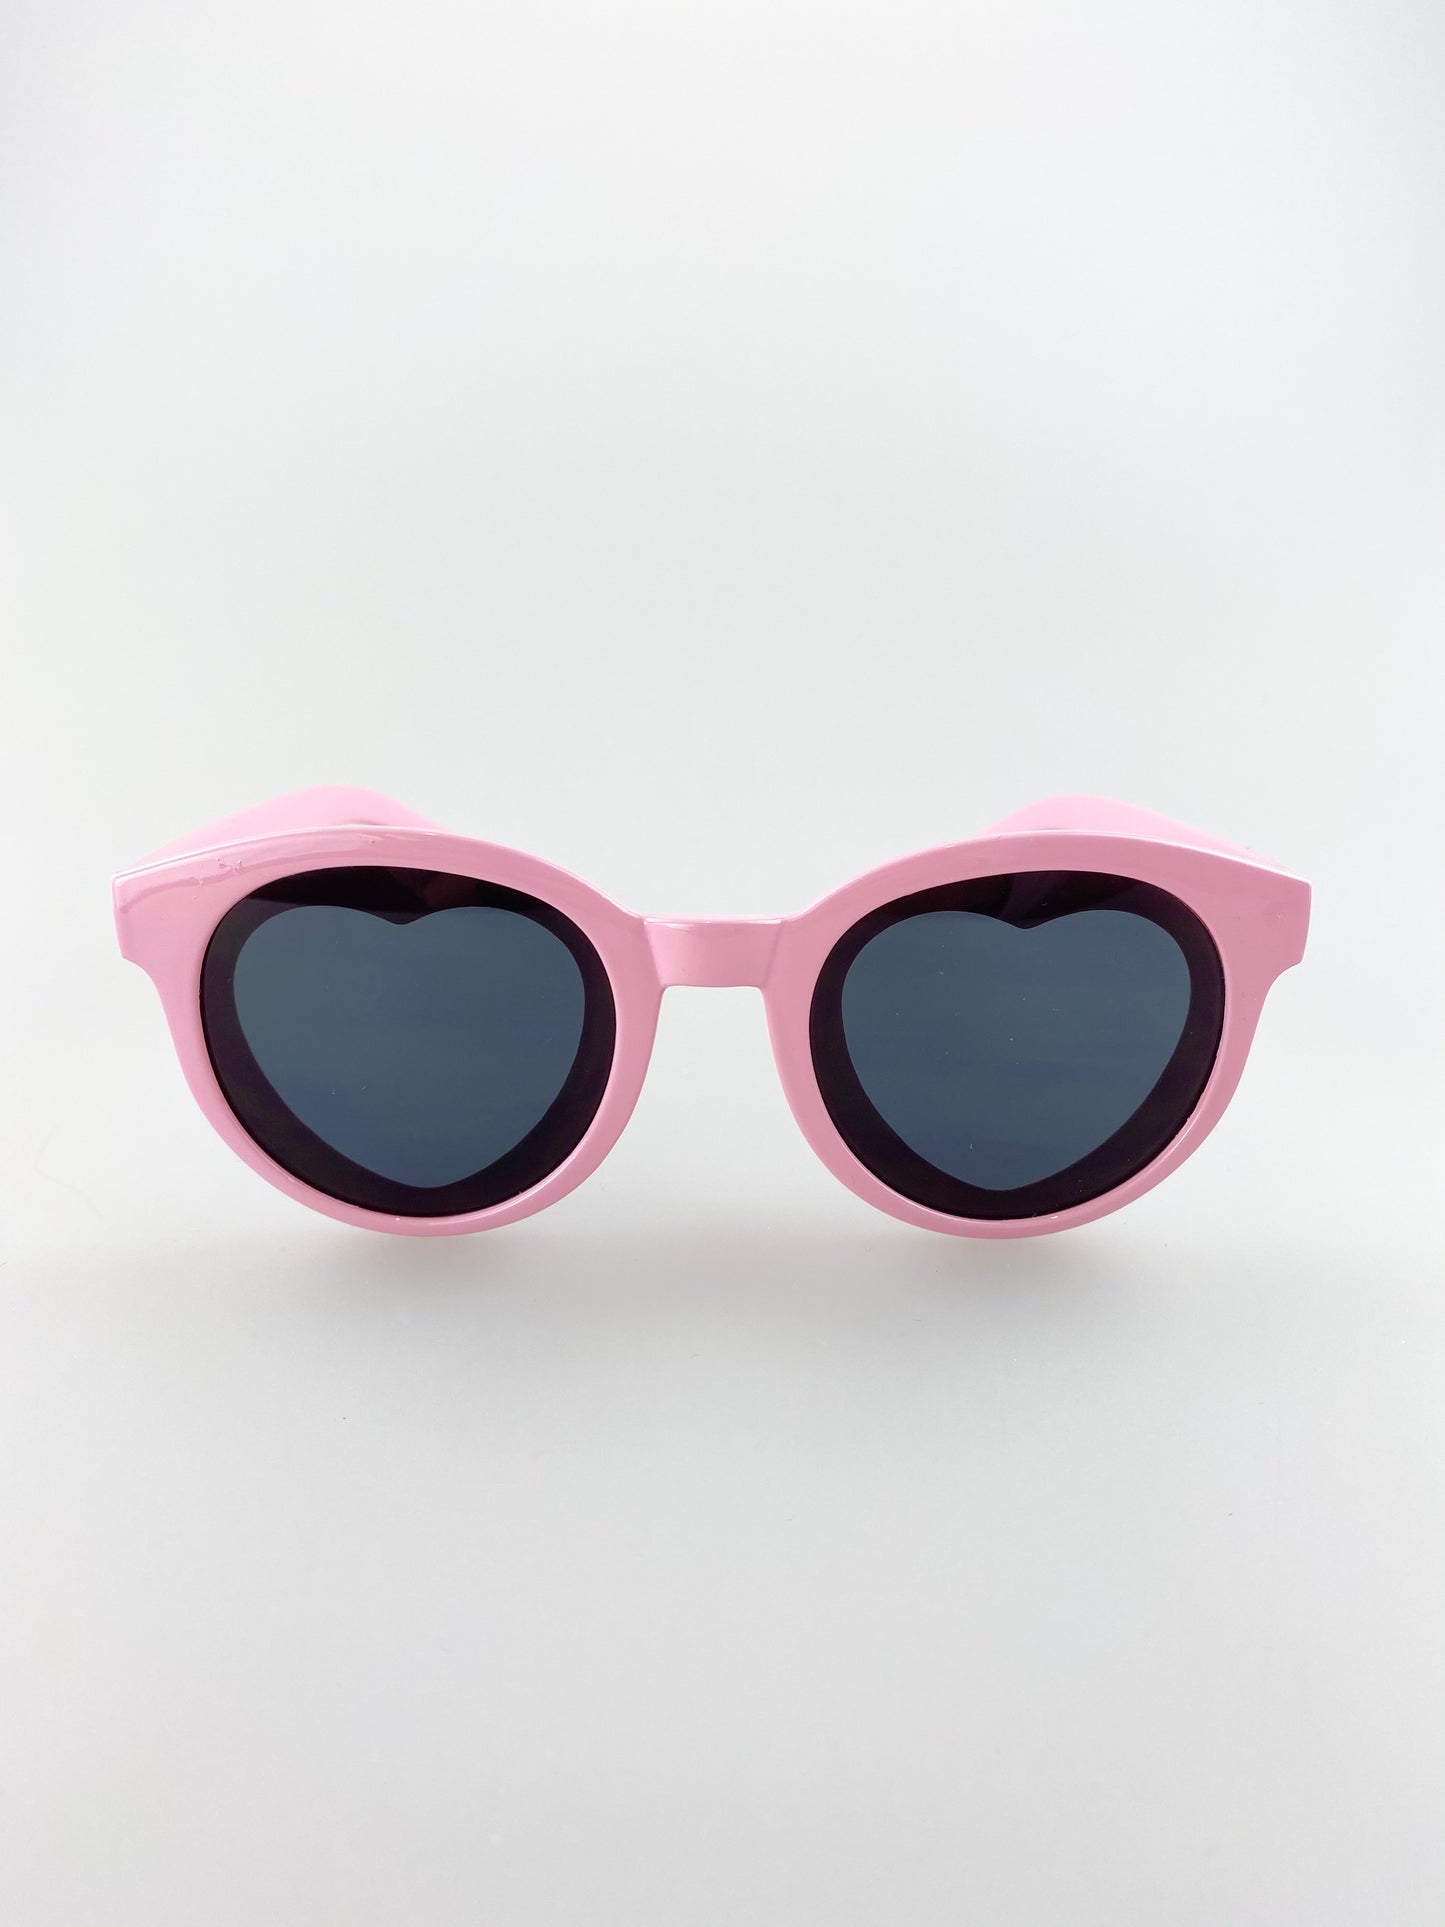 Round Pink Sunglasses with heart lenses